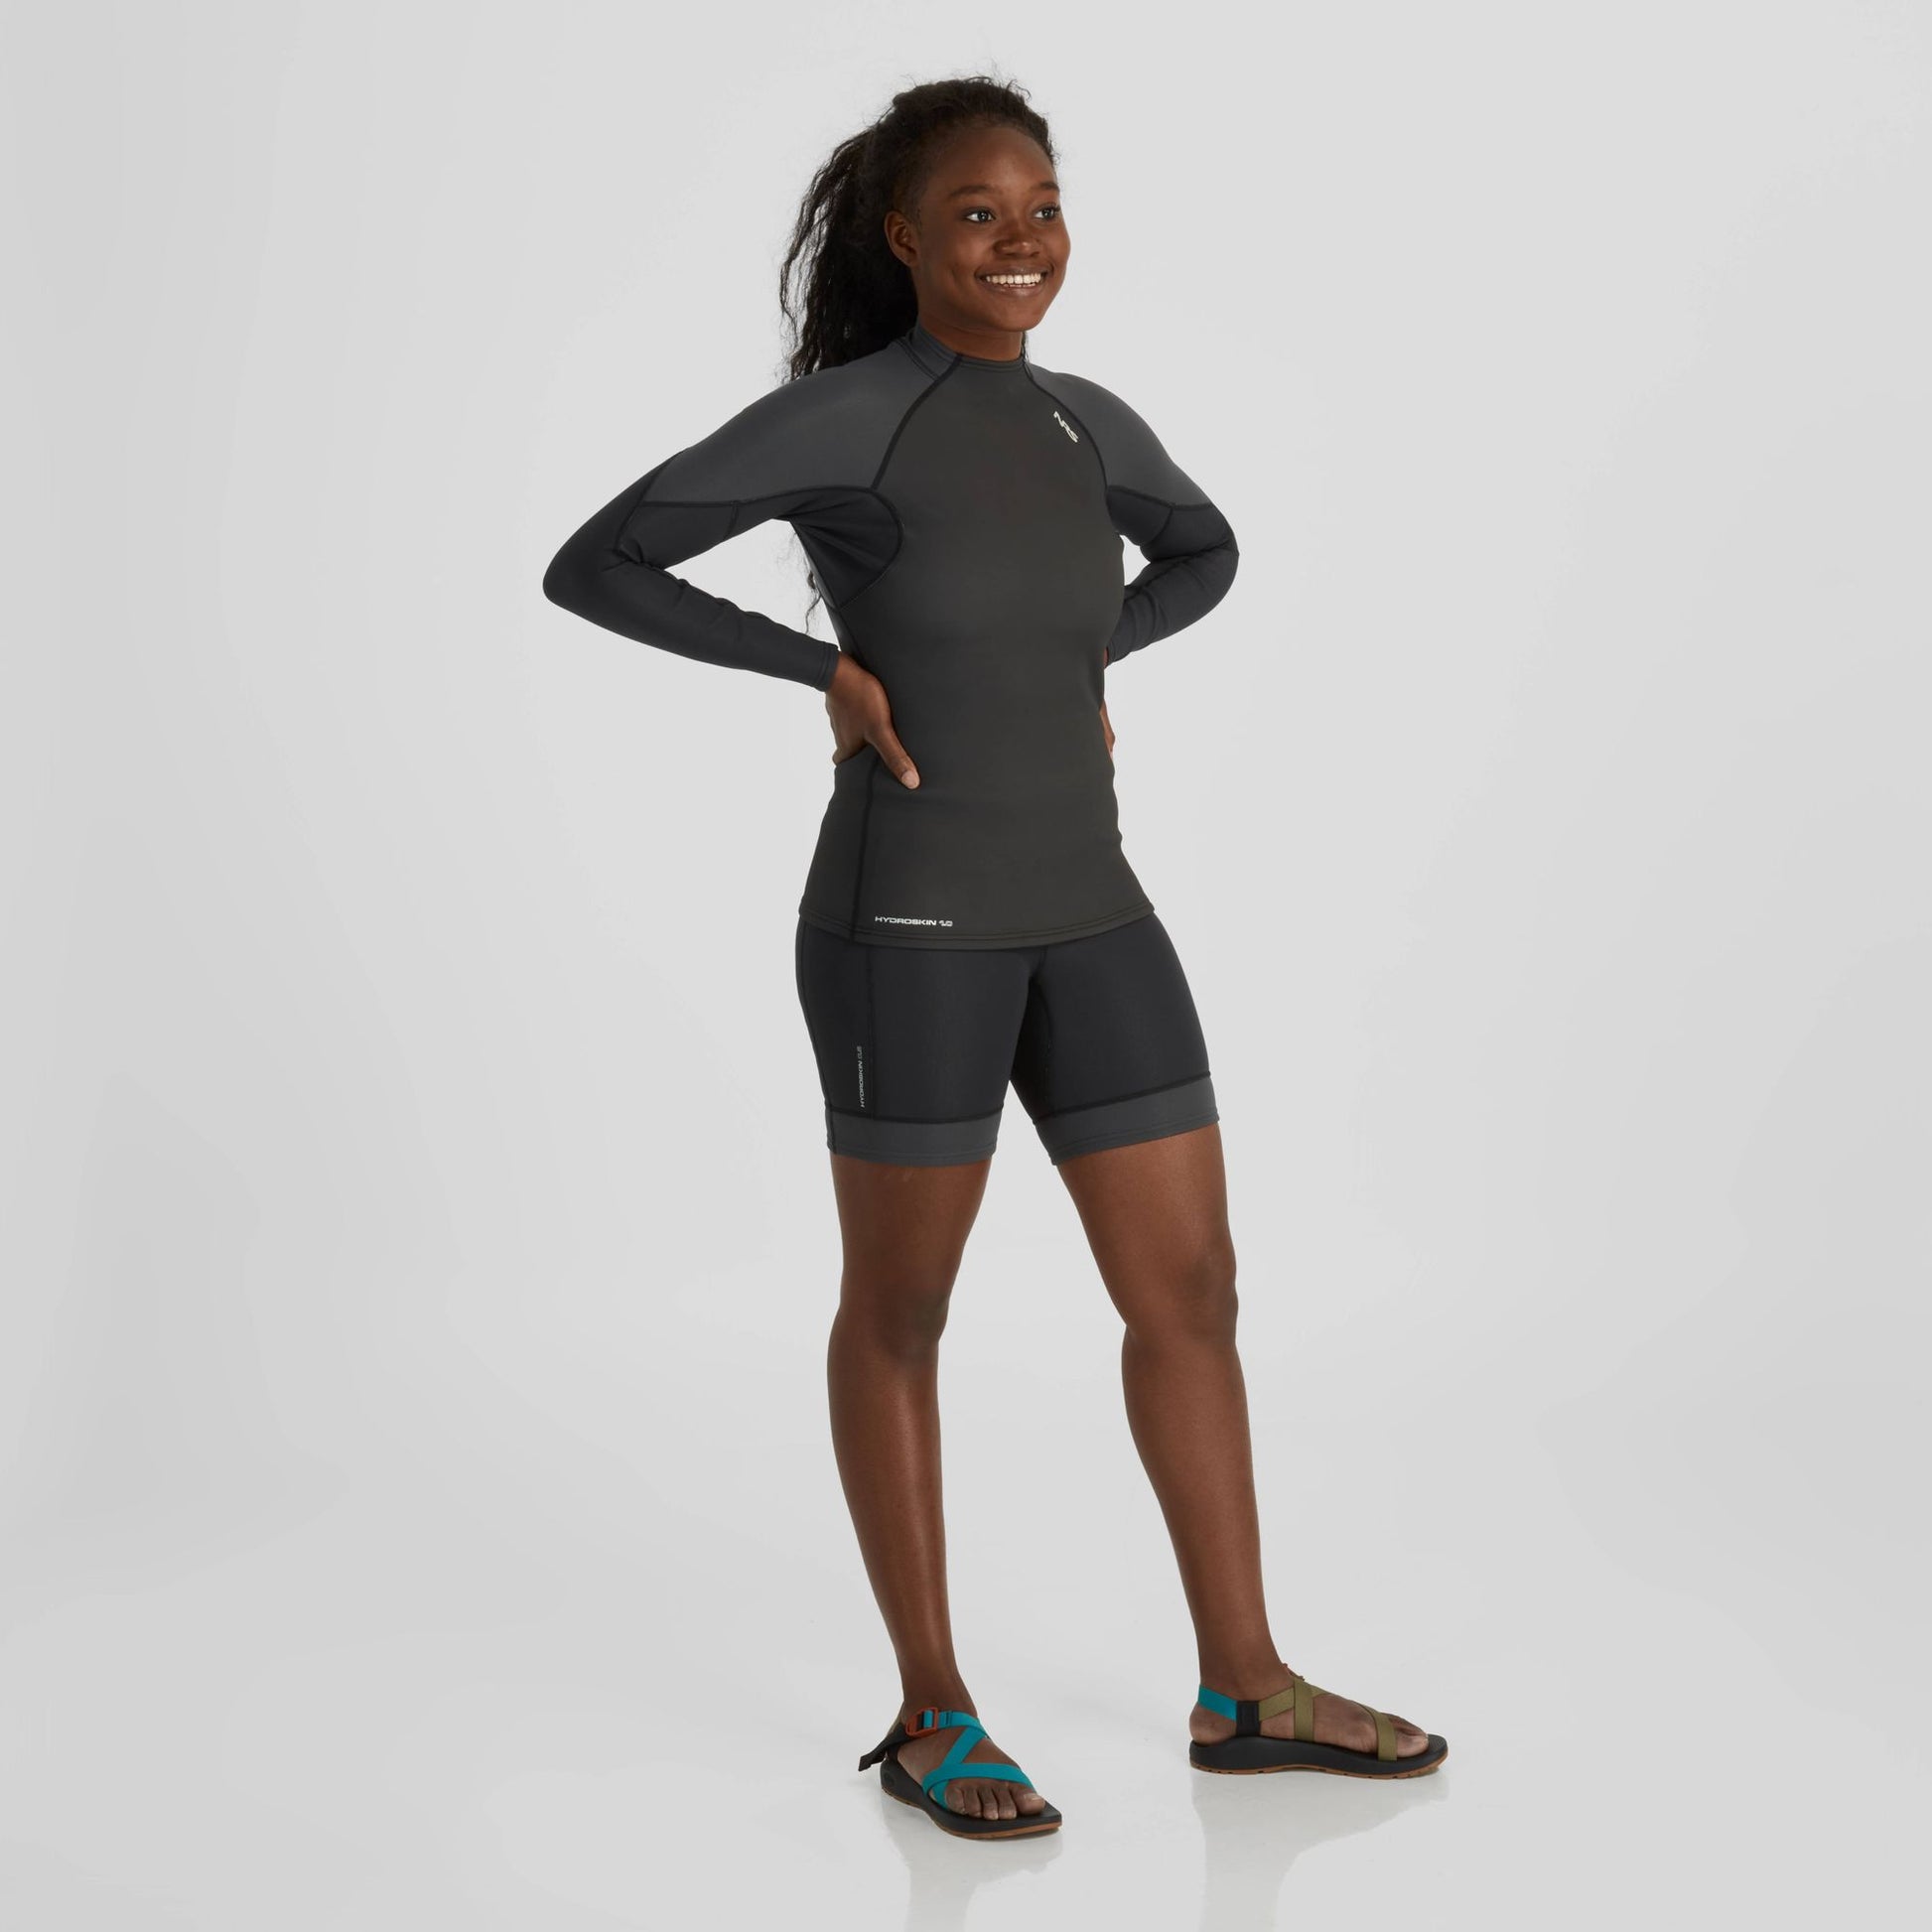 A woman wearing a NRS Hydroskin 1.0 Long Sleeve Shirt - Women's in a sports outfit.